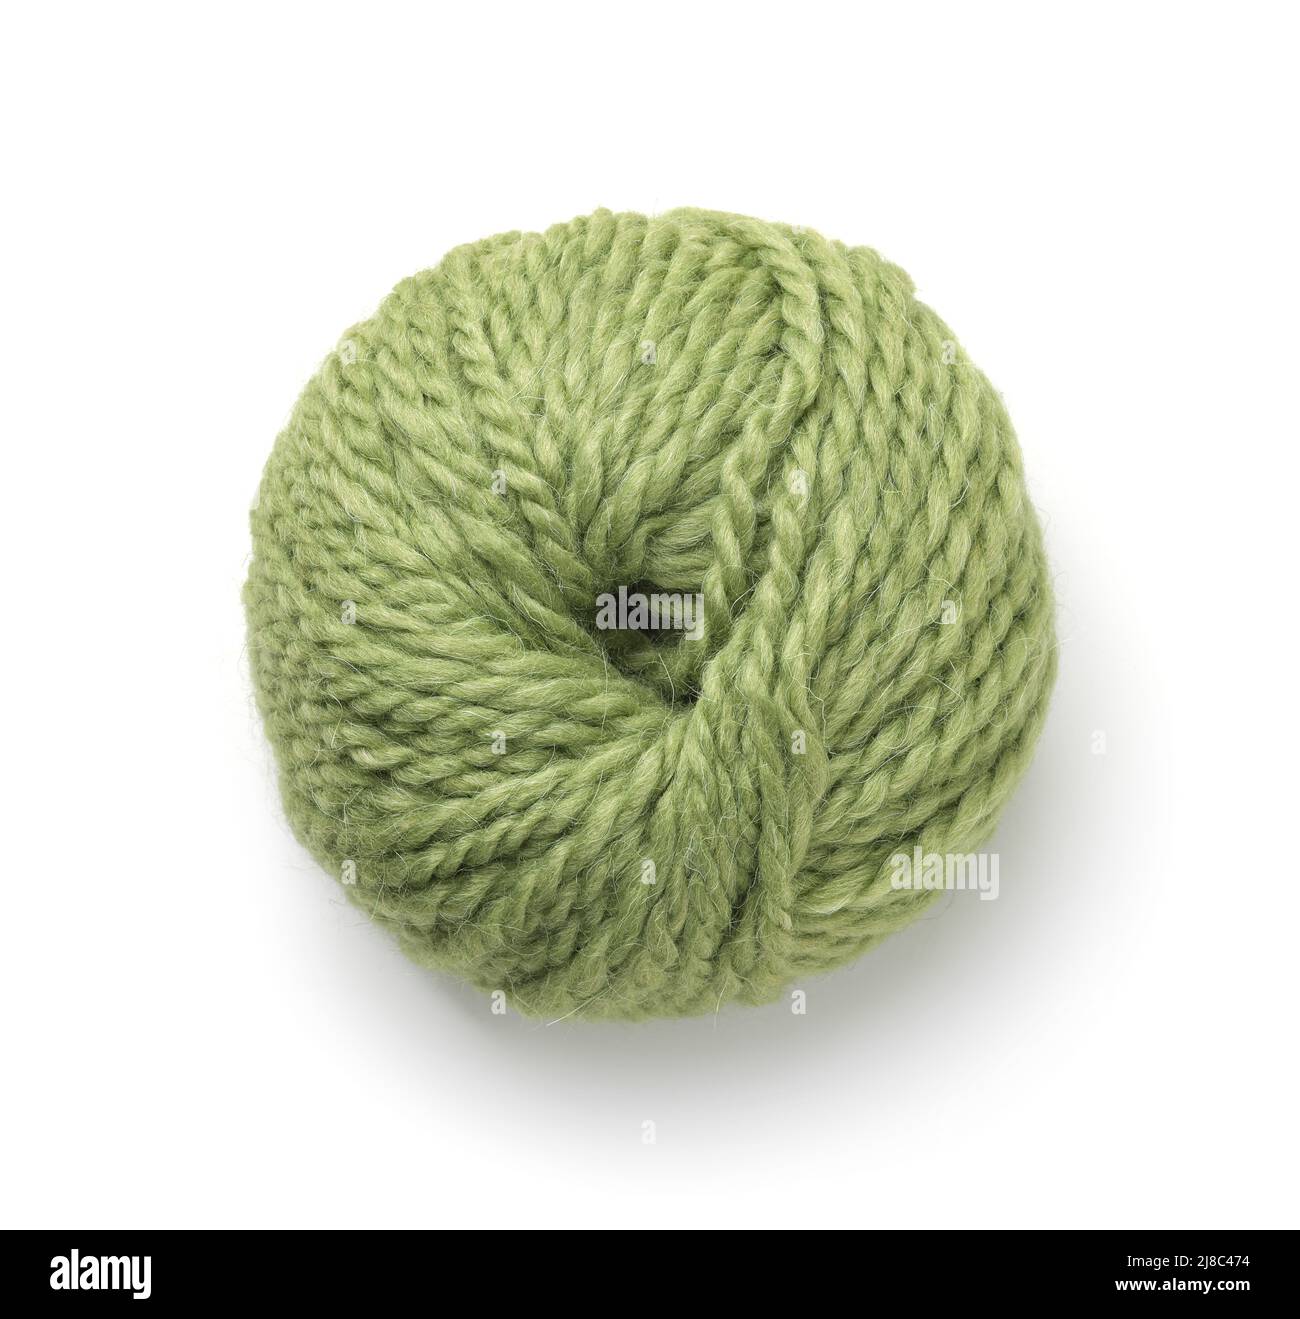 Top view of olive green wool yarn skein isolated on white Stock Photo